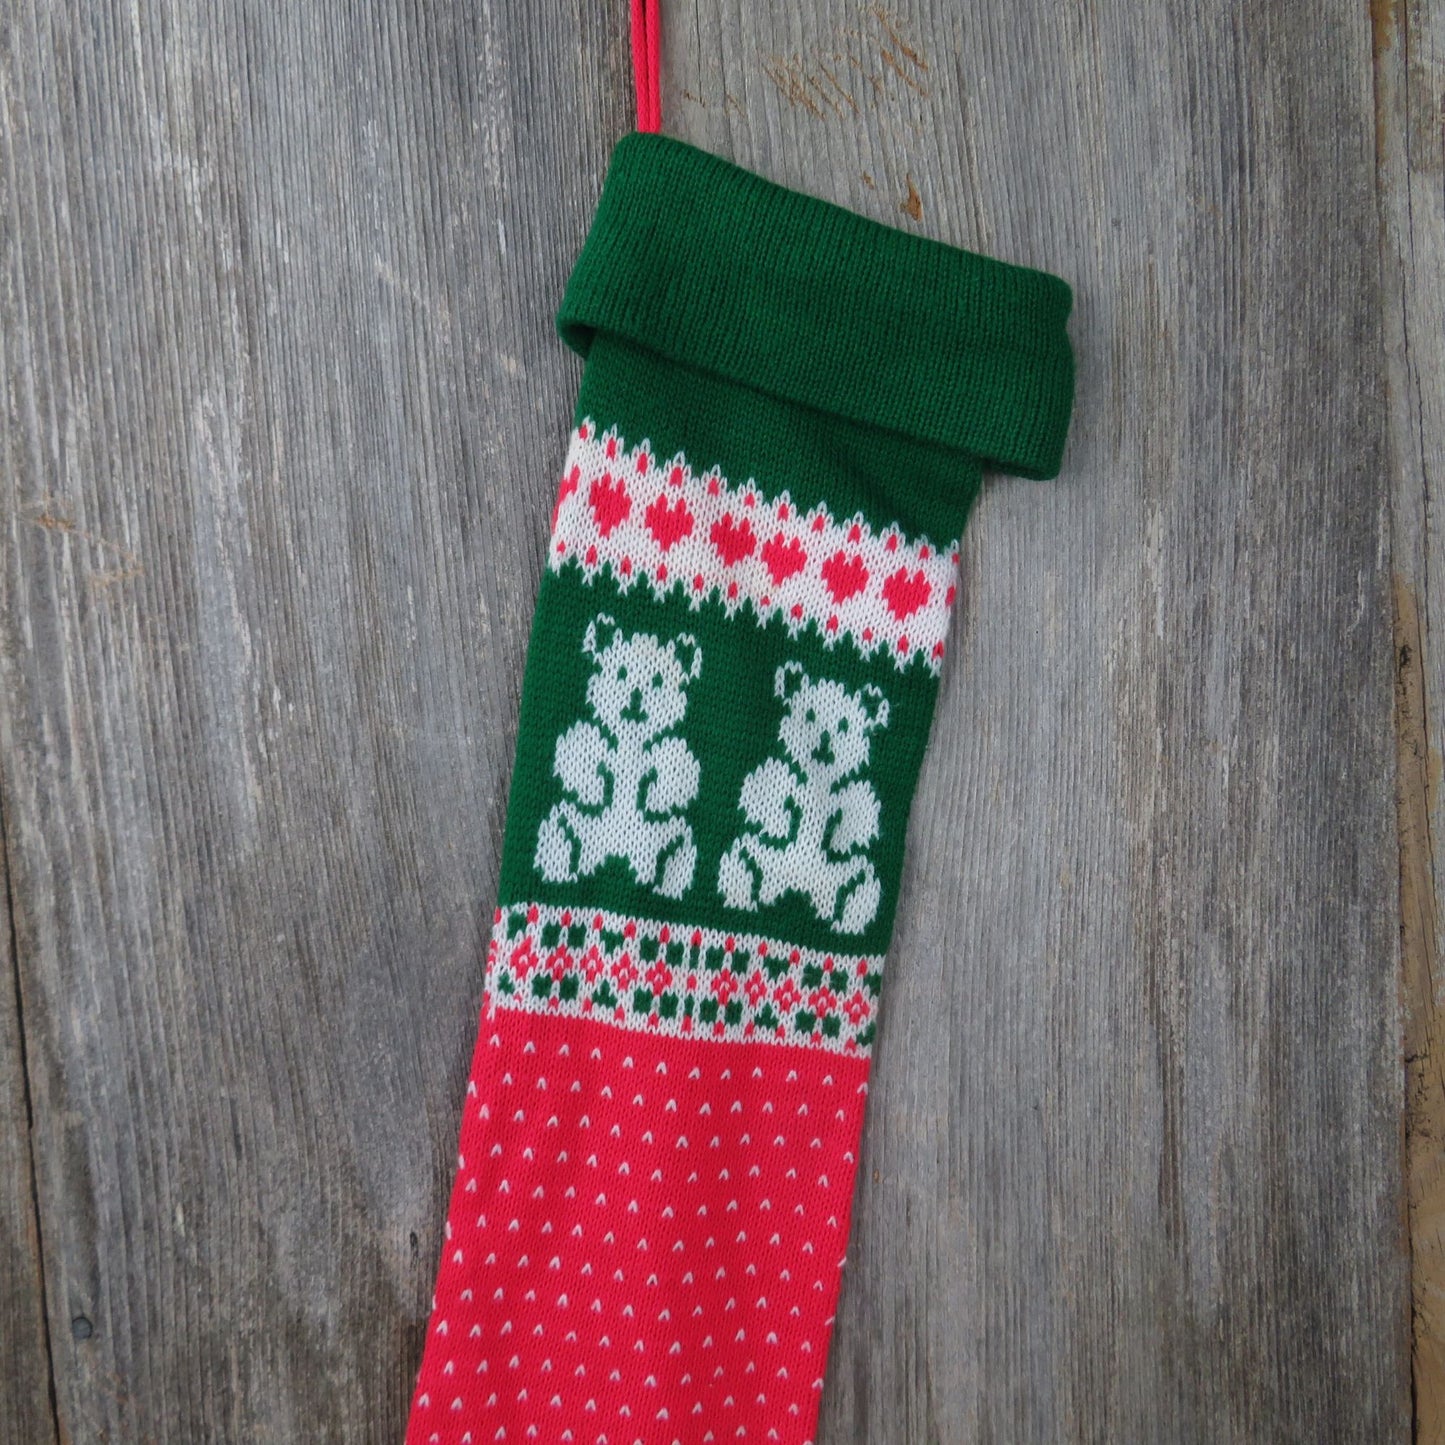 Knit Teddy Bear Stocking Christmas Red Green White Vintage Stretchy Decoration 1980s